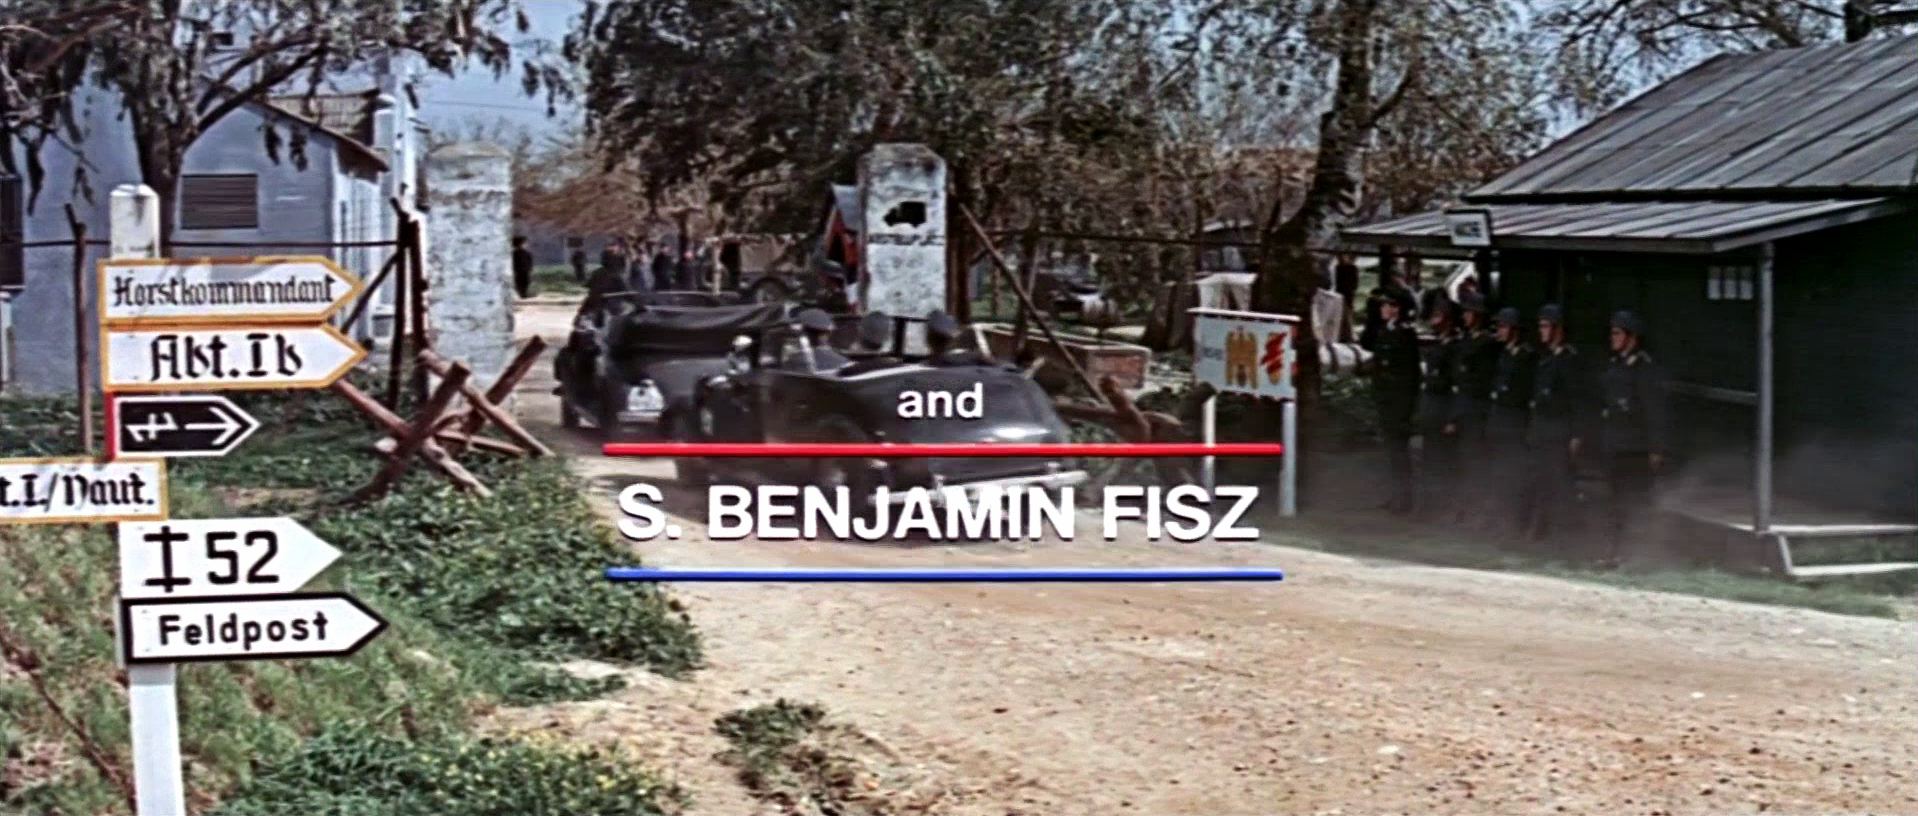 Main title from Battle of Britain (1969) (28)